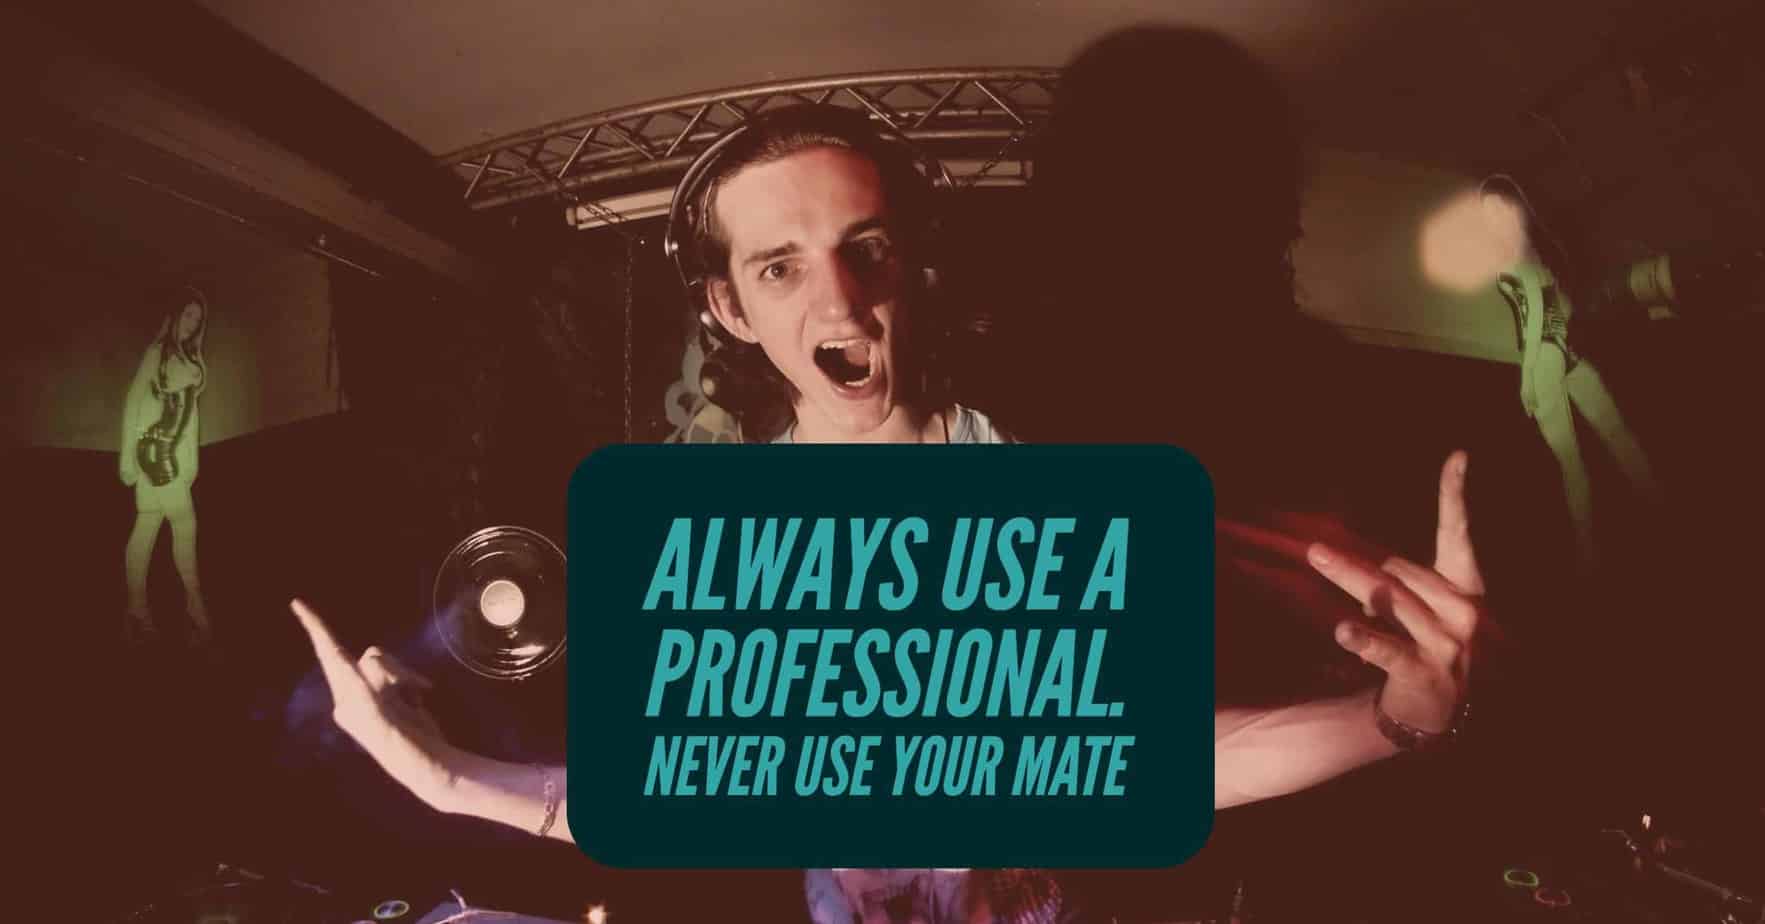 5 Reasons To Use A Pro and Not Your Mate